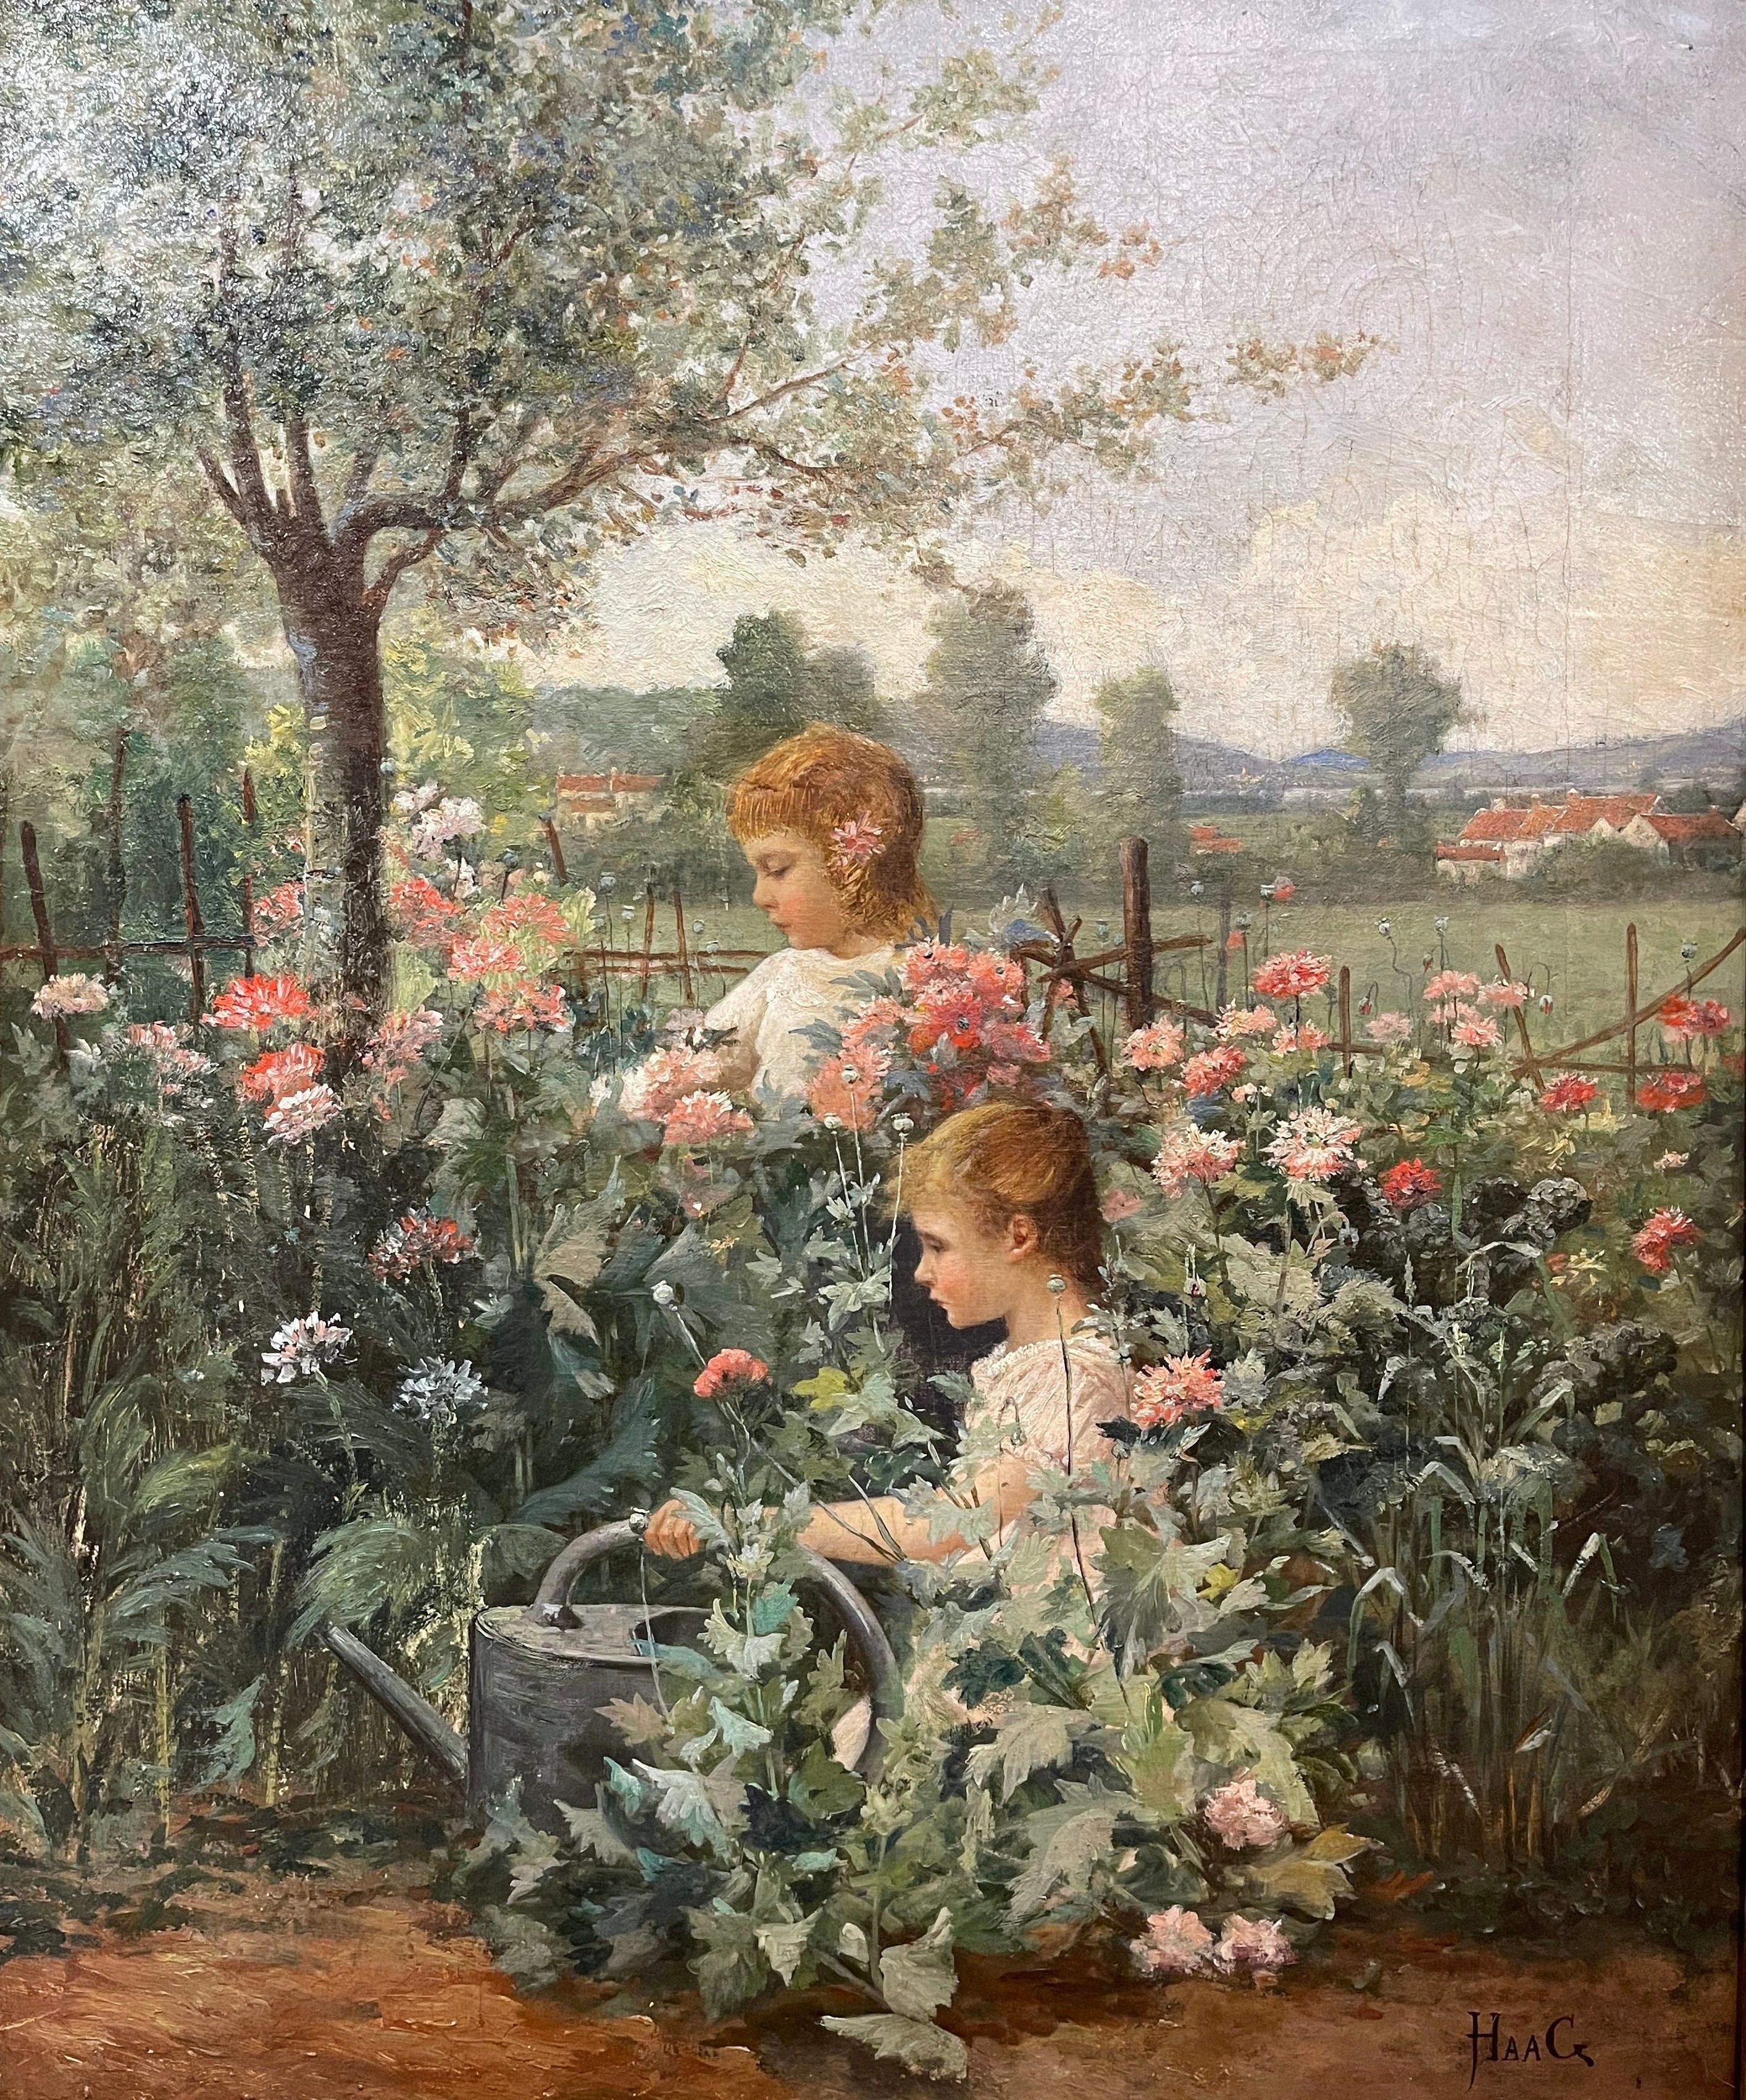 This sweet antique oil on canvas painting was created circa 1880. Signed on the lower right corner by the artist, Jean Paul Haag, the artwork depicts two young girls picking flowers in a field. The painting is in excellent condition with rich and